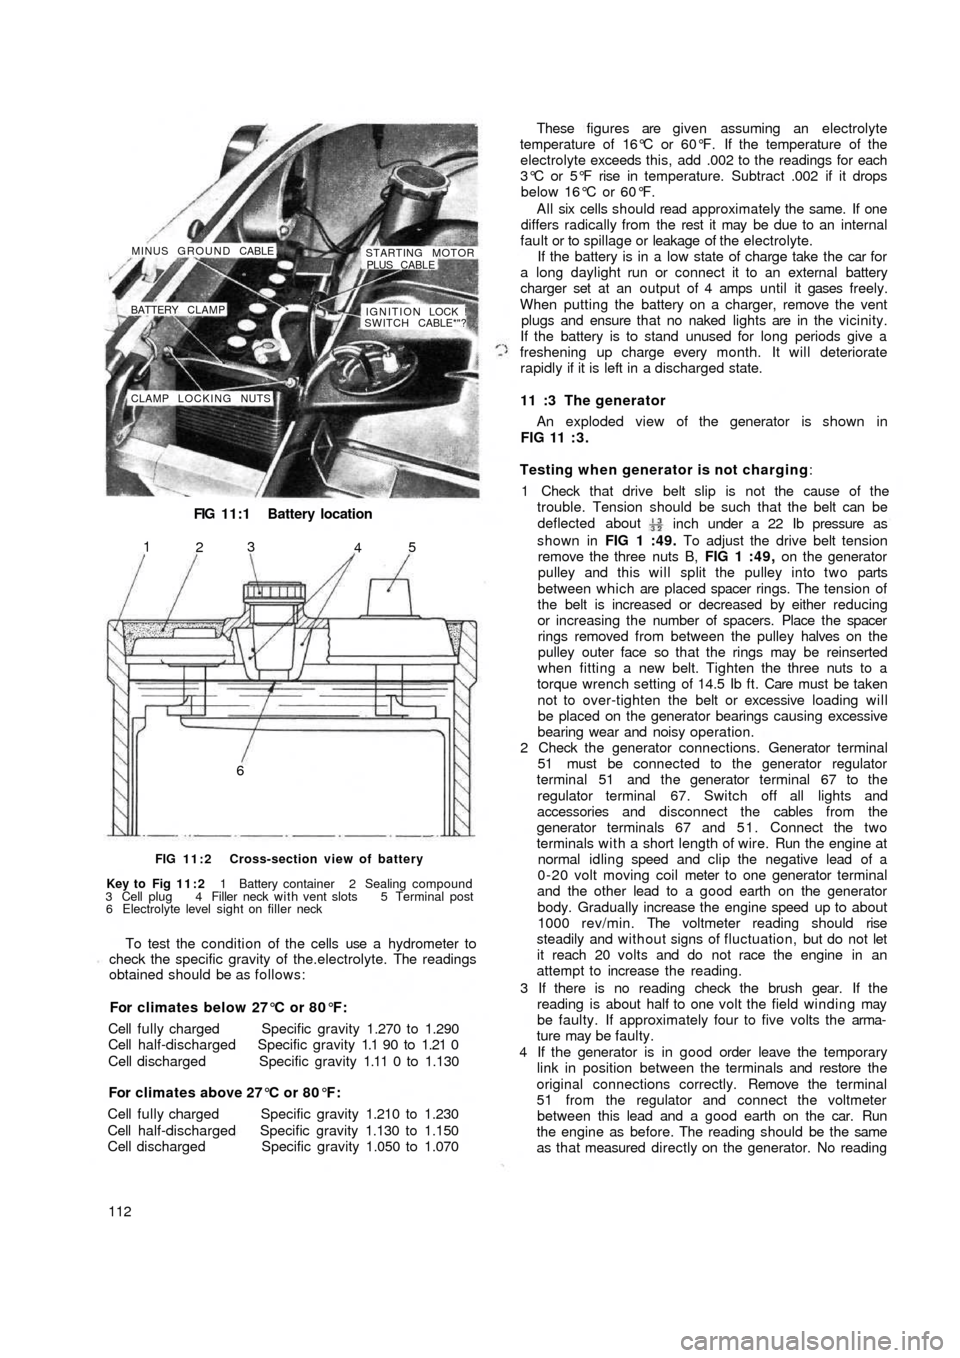 FIAT 500 1966 1.G Workshop Manual FIG 11:1 Battery location
CLAMP LOCKING NUTSIGNITION LOCK !
SWITCH CABLE*"? BATTERY CLAMP MINUS GROUND CABLE
STARTING MOTOR
PLUS CABLE
65
4 3
2 1
FIG 11:2 Cross-section view of battery
Key to  Fig  11